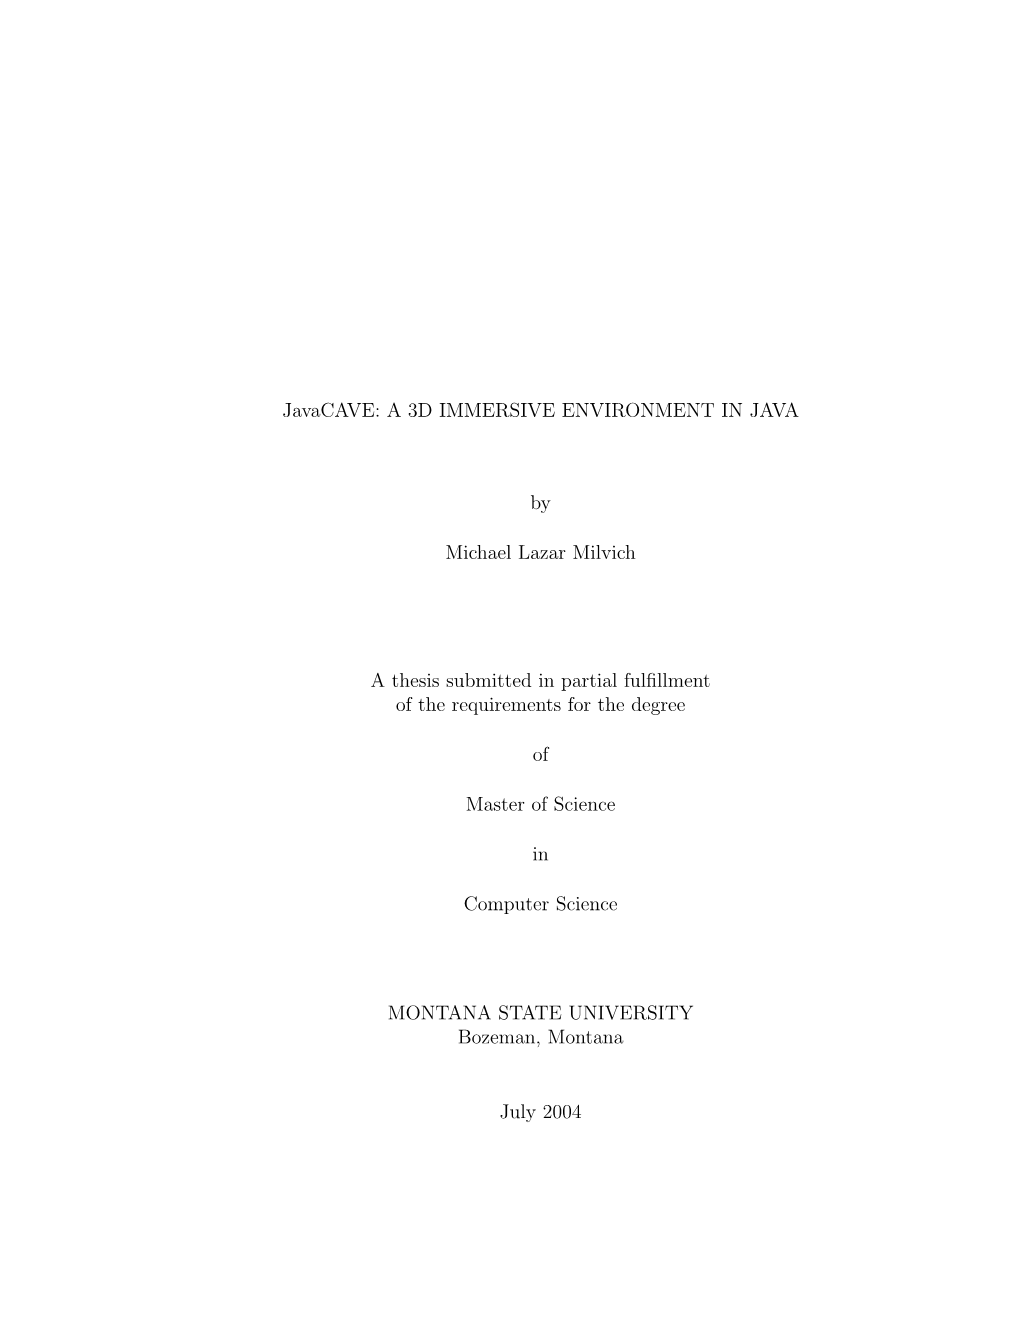 Javacave: a 3D IMMERSIVE ENVIRONMENT in JAVA by Michael Lazar Milvich a Thesis Submitted in Partial Fulfillment of the Requireme